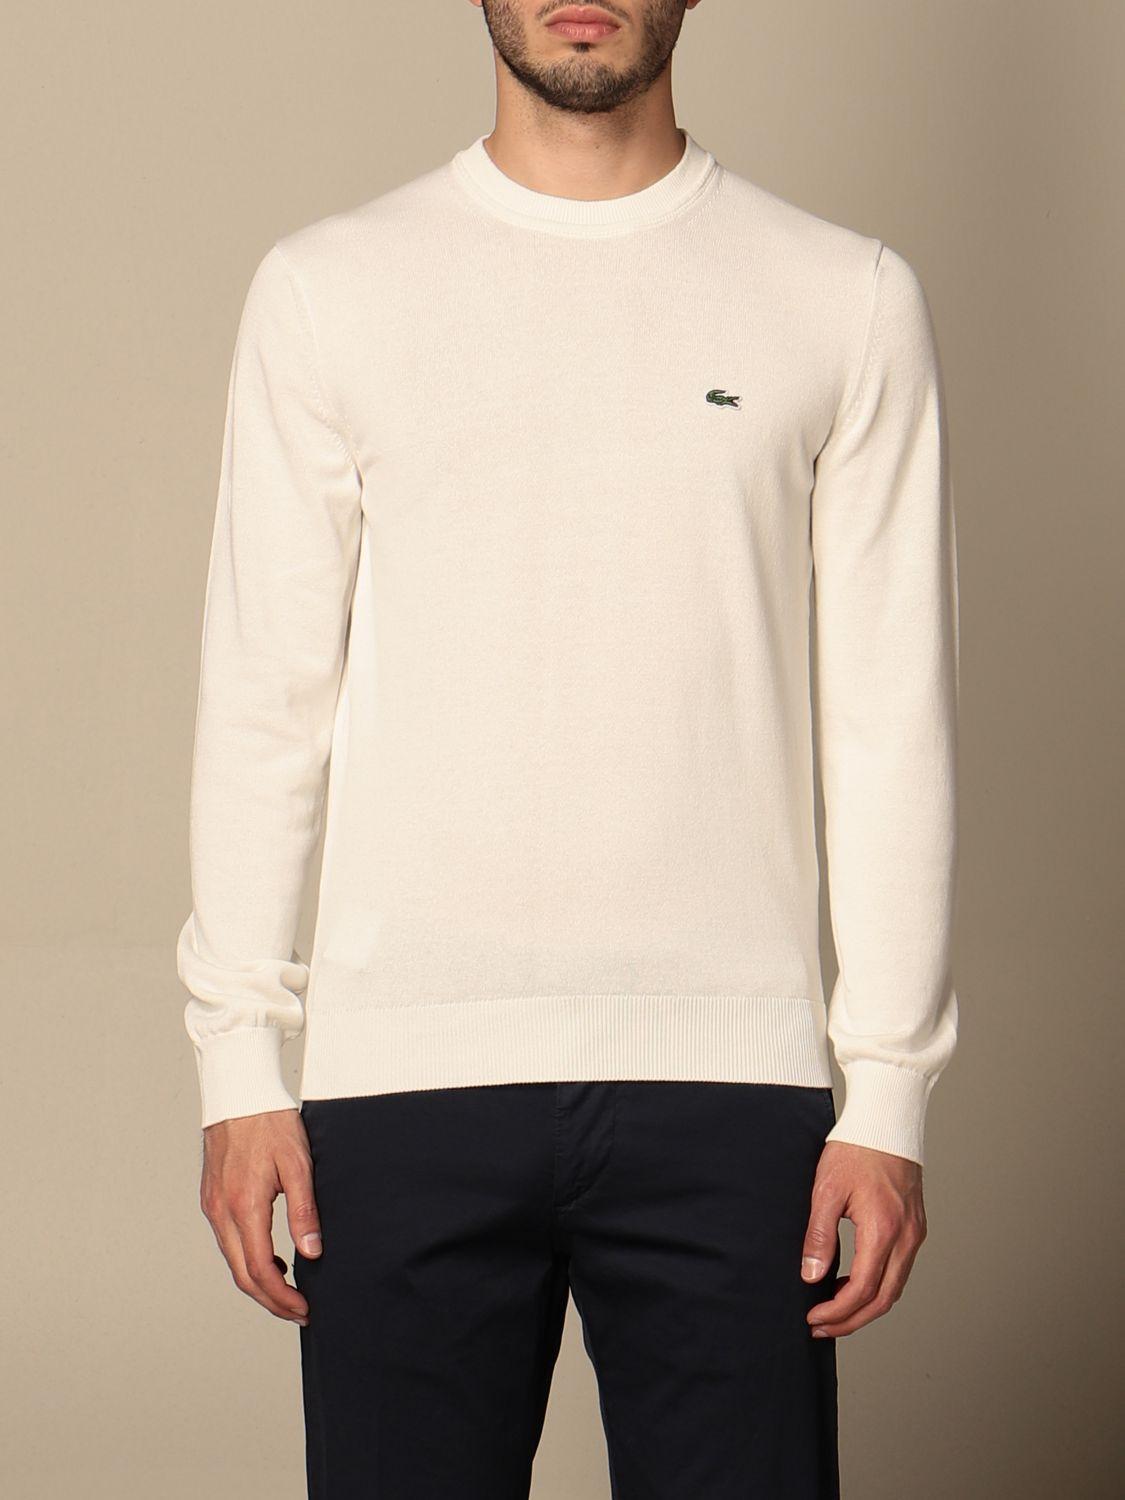 Lacoste Sweater in White for Men - Lyst